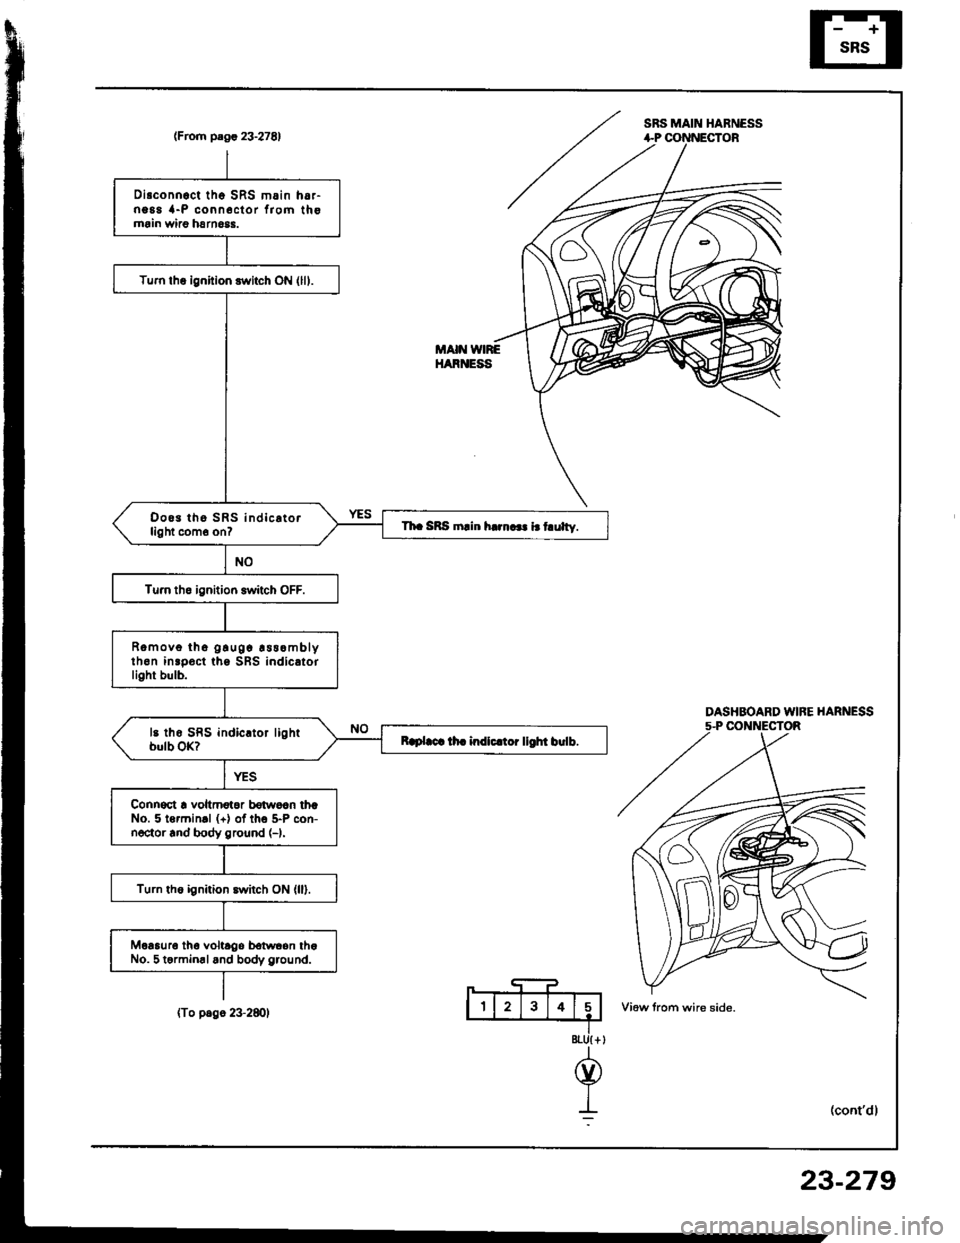 HONDA INTEGRA 1994 4.G Service Manual SRS MAIN HABNESS(From plgr 23.27E1
DASHBOARD WIFE HARNESS5-P CONNECTOR
8tU{ +
@
I:
Disconnoct tho SRS m.in h6,-ng88 {-P conn6clor f,om thomrin wiao harn6$.
Tum lhq ignition switch ON (lll.
Doo3 tho SR